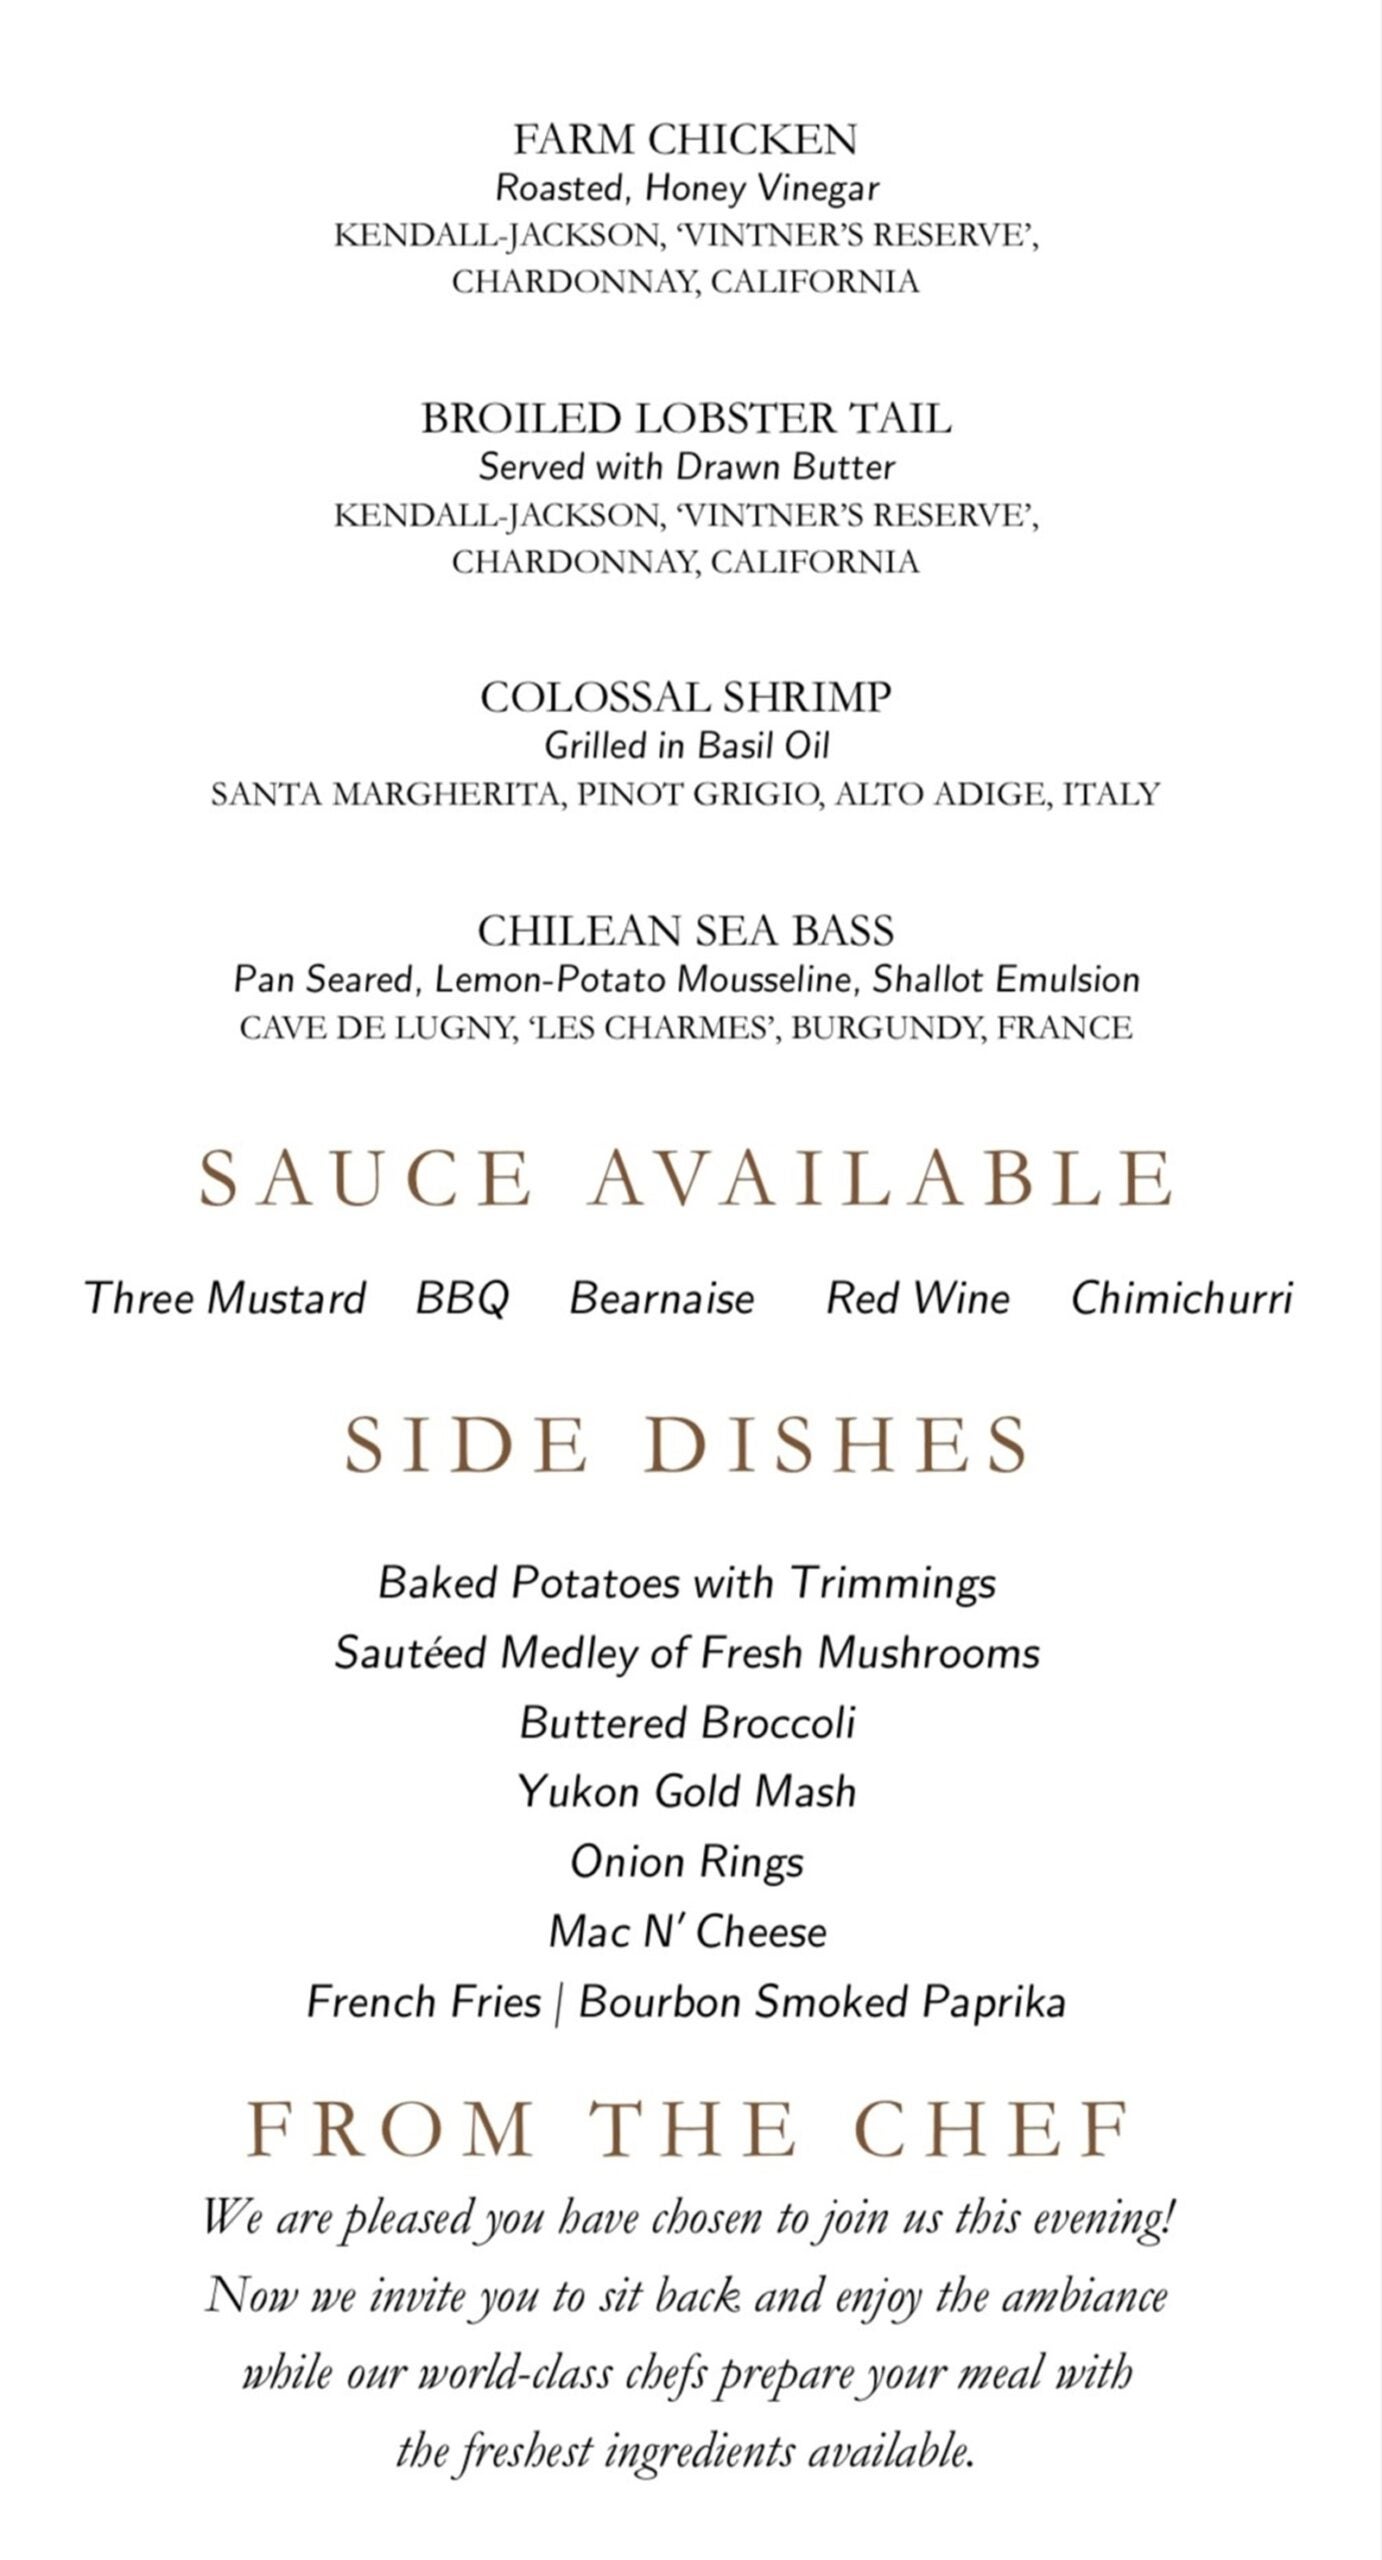 A steakhouse menu listing sauces and side dishes